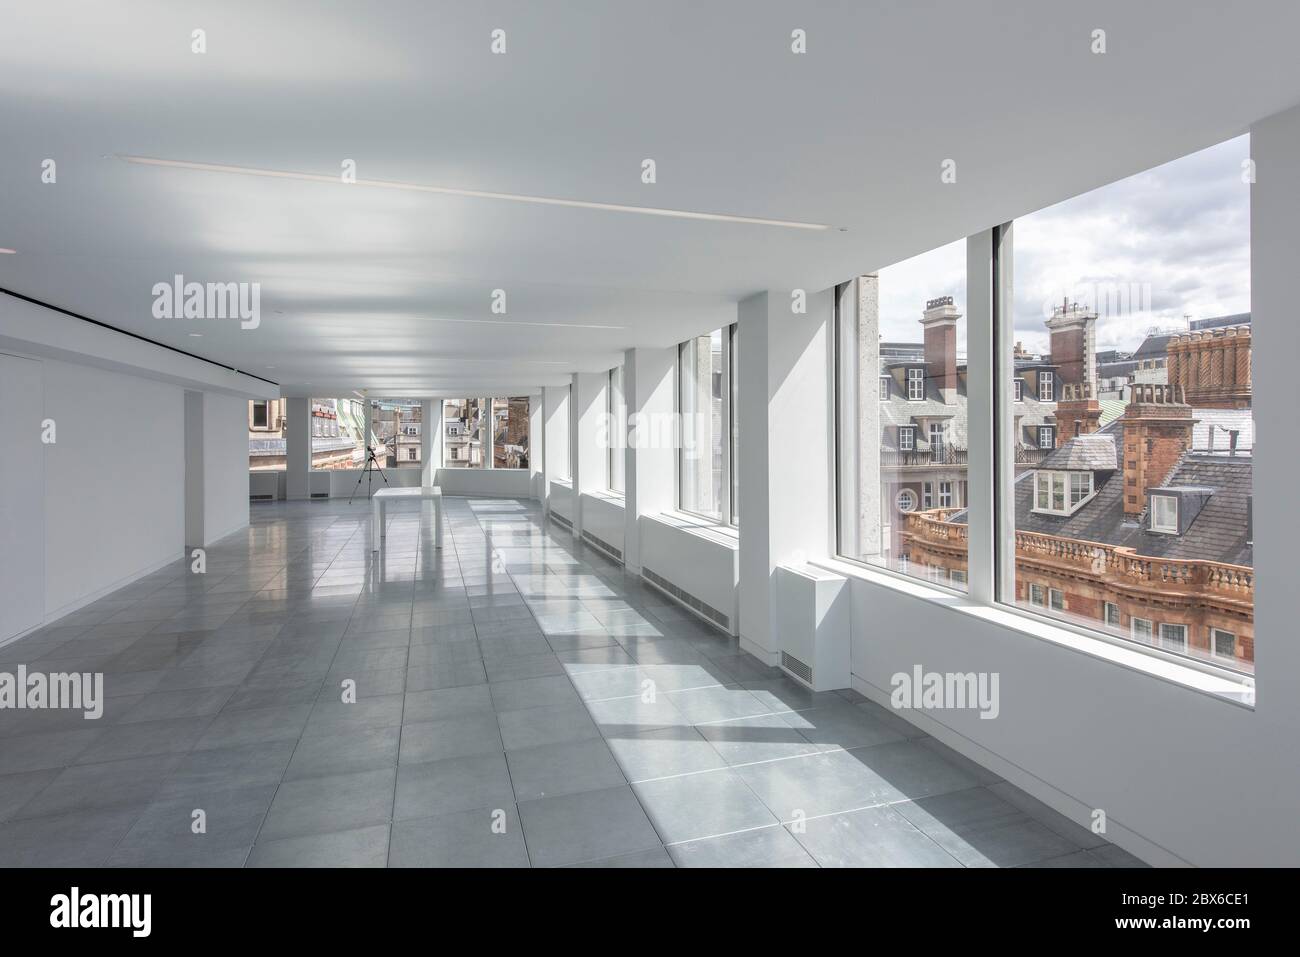 Interior of the main commercial tower block of The Economist Building. The Smithson, London, United Kingdom. Architect: Alison & Peter Smithson, DSDHA Stock Photo